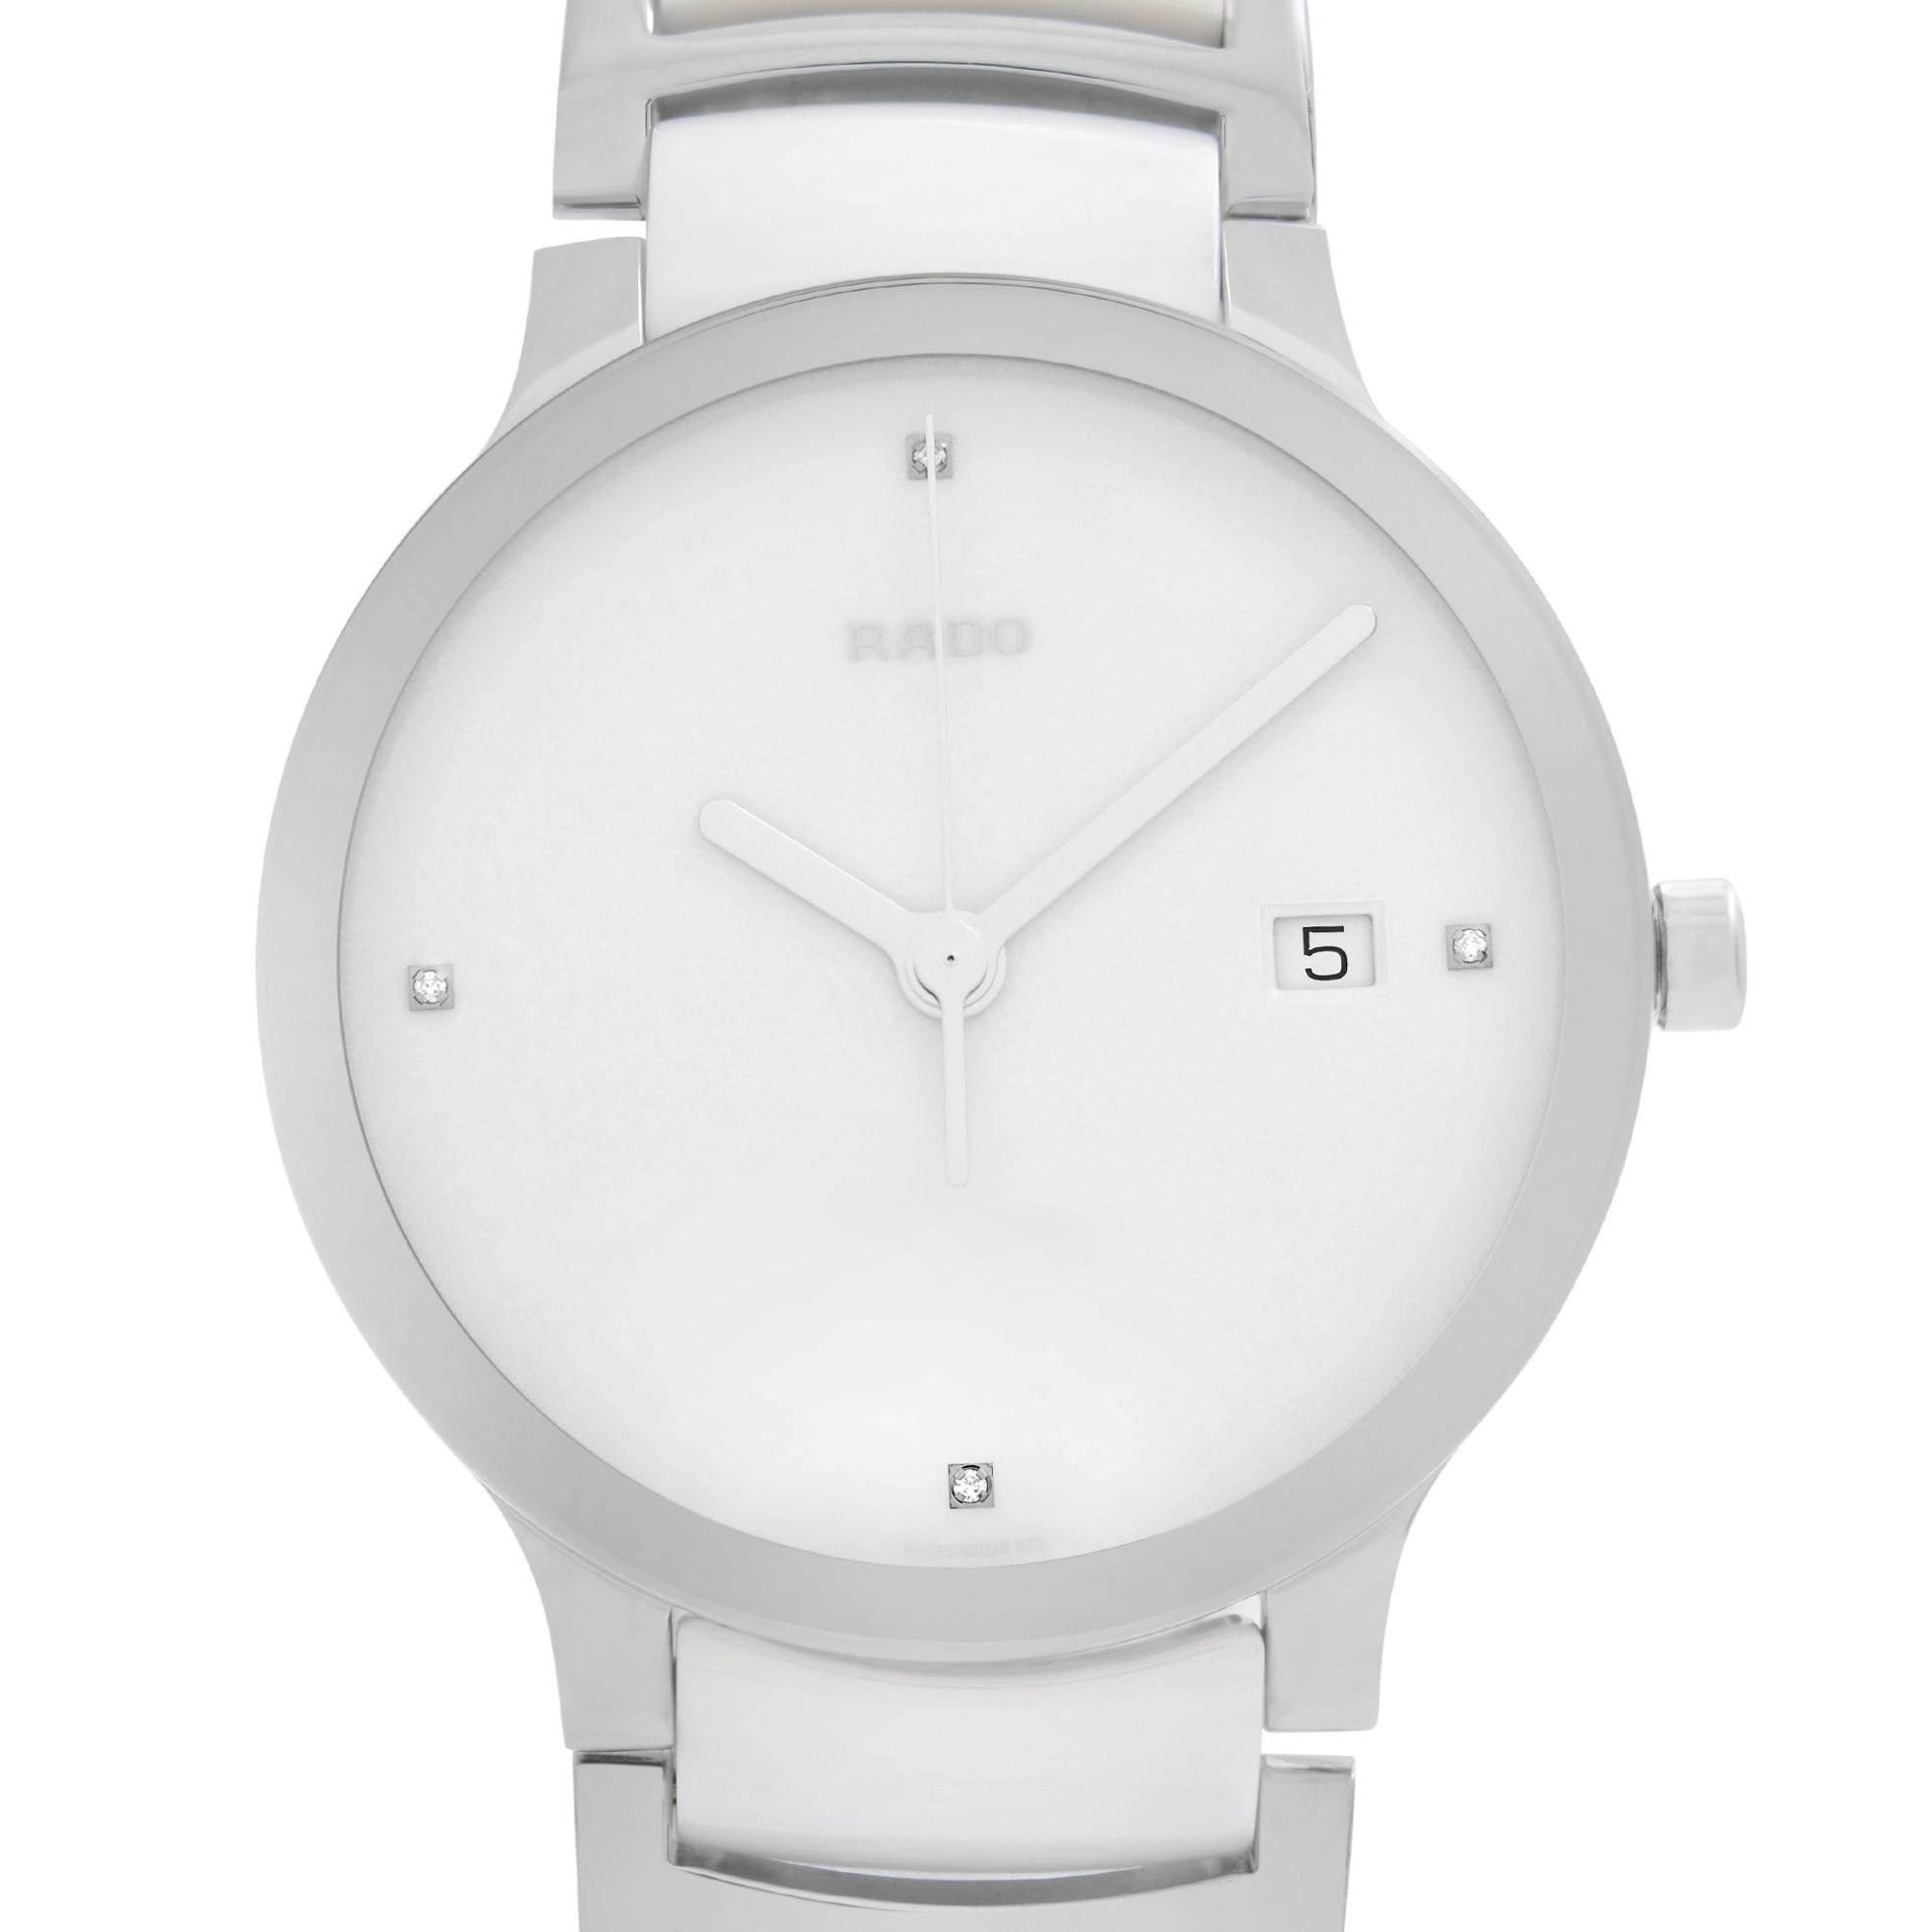 Store Display Model Rado Centrix Jubile Stainless Steel White Dial Quartz Men's Watch. Can have minor blemishes during Handling and store display. This Beautiful Timepiece Features: Stainless Steel Case with a Stainless Steel Bracelet with White